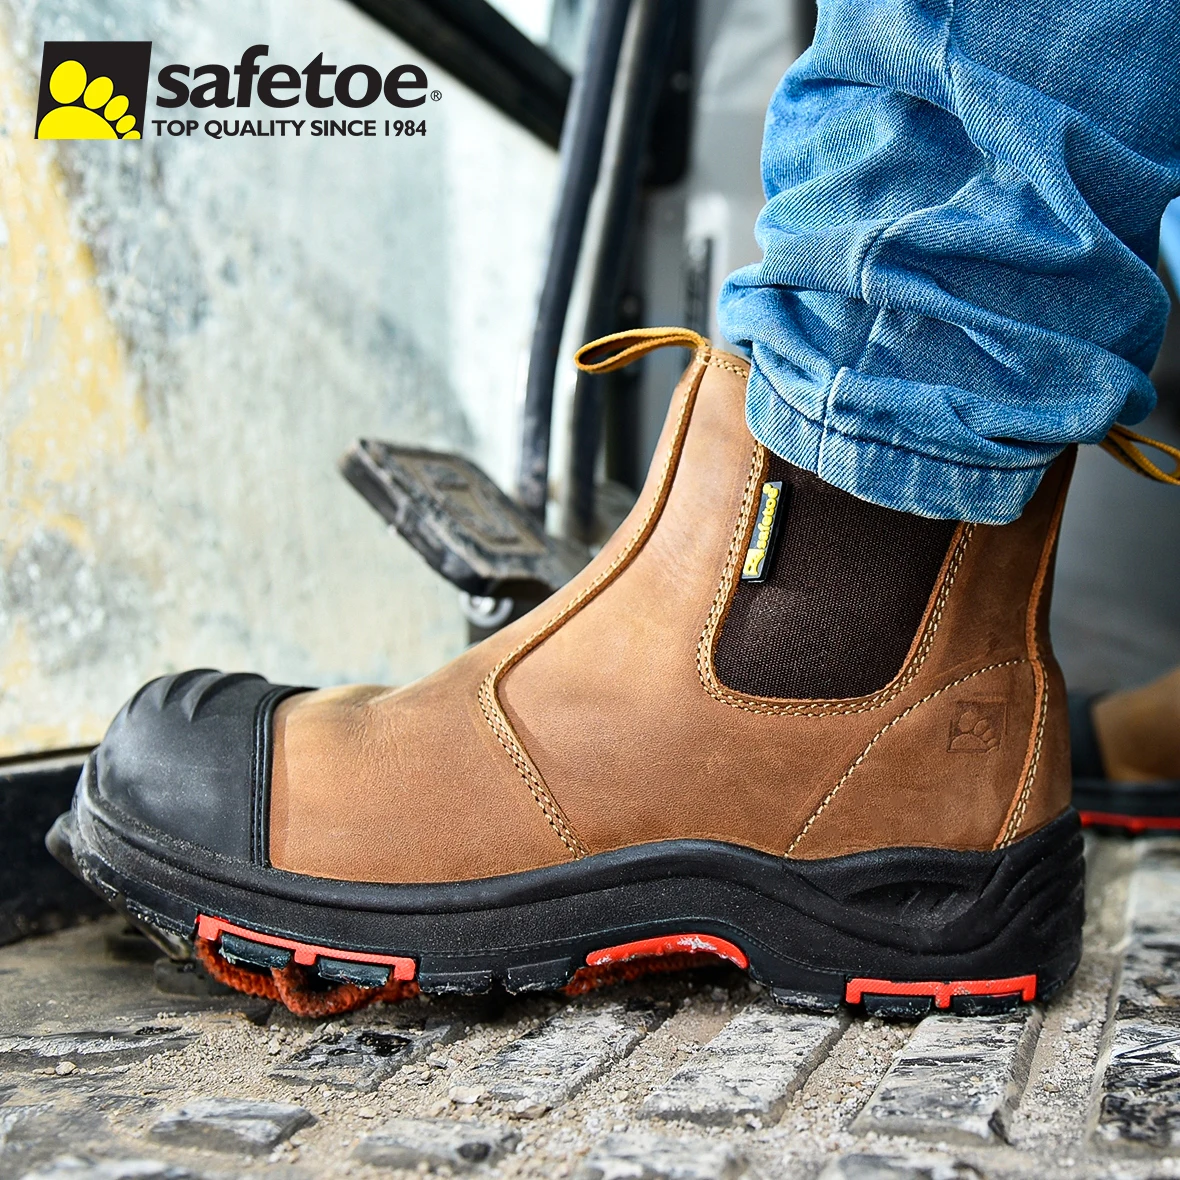 

Safetoe Composite Toe Cow Leather Indestructible S3 Industrial Safety Shoe Men's Construction Protective Security Work Shoe Boot